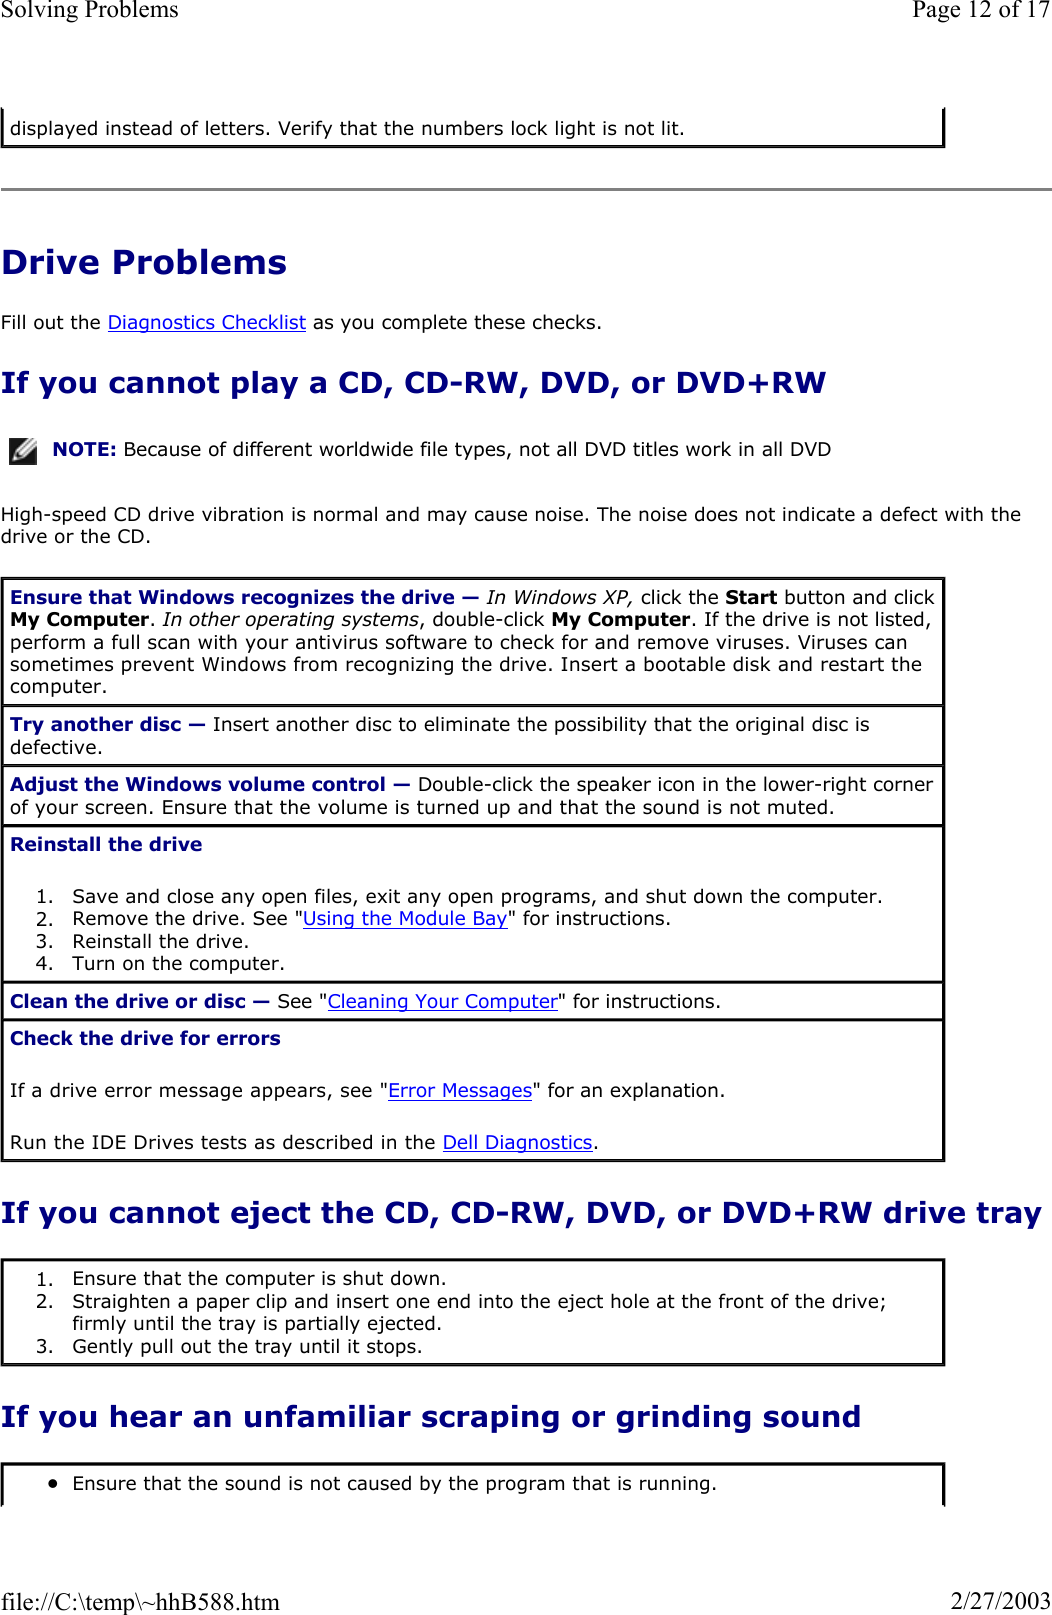 Drive Problems Fill out the Diagnostics Checklist as you complete these checks. If you cannot play a CD, CD-RW, DVD, or DVD+RW High-speed CD drive vibration is normal and may cause noise. The noise does not indicate a defect with the drive or the CD. If you cannot eject the CD, CD-RW, DVD, or DVD+RW drive trayIf you hear an unfamiliar scraping or grinding sound displayed instead of letters. Verify that the numbers lock light is not lit. NOTE: Because of different worldwide file types, not all DVD titles work in all DVD Ensure that Windows recognizes the drive — In Windows XP, click the Start button and click My Computer.In other operating systems, double-click My Computer. If the drive is not listed, perform a full scan with your antivirus software to check for and remove viruses. Viruses can sometimes prevent Windows from recognizing the drive. Insert a bootable disk and restart the computer.  Try another disc — Insert another disc to eliminate the possibility that the original disc is defective. Adjust the Windows volume control — Double-click the speaker icon in the lower-right corner of your screen. Ensure that the volume is turned up and that the sound is not muted.  Reinstall the drive1. Save and close any open files, exit any open programs, and shut down the computer.  2. Remove the drive. See &quot;Using the Module Bay&quot; for instructions.  3. Reinstall the drive.  4. Turn on the computer.  Clean the drive or disc — See &quot;Cleaning Your Computer&quot; for instructions.  Check the drive for errorsIf a drive error message appears, see &quot;Error Messages&quot; for an explanation. Run the IDE Drives tests as described in the Dell Diagnostics.1. Ensure that the computer is shut down.  2. Straighten a paper clip and insert one end into the eject hole at the front of the drive; firmly until the tray is partially ejected.  3. Gently pull out the tray until it stops.  zEnsure that the sound is not caused by the program that is running.  Page 12 of 17Solving Problems2/27/2003file://C:\temp\~hhB588.htm